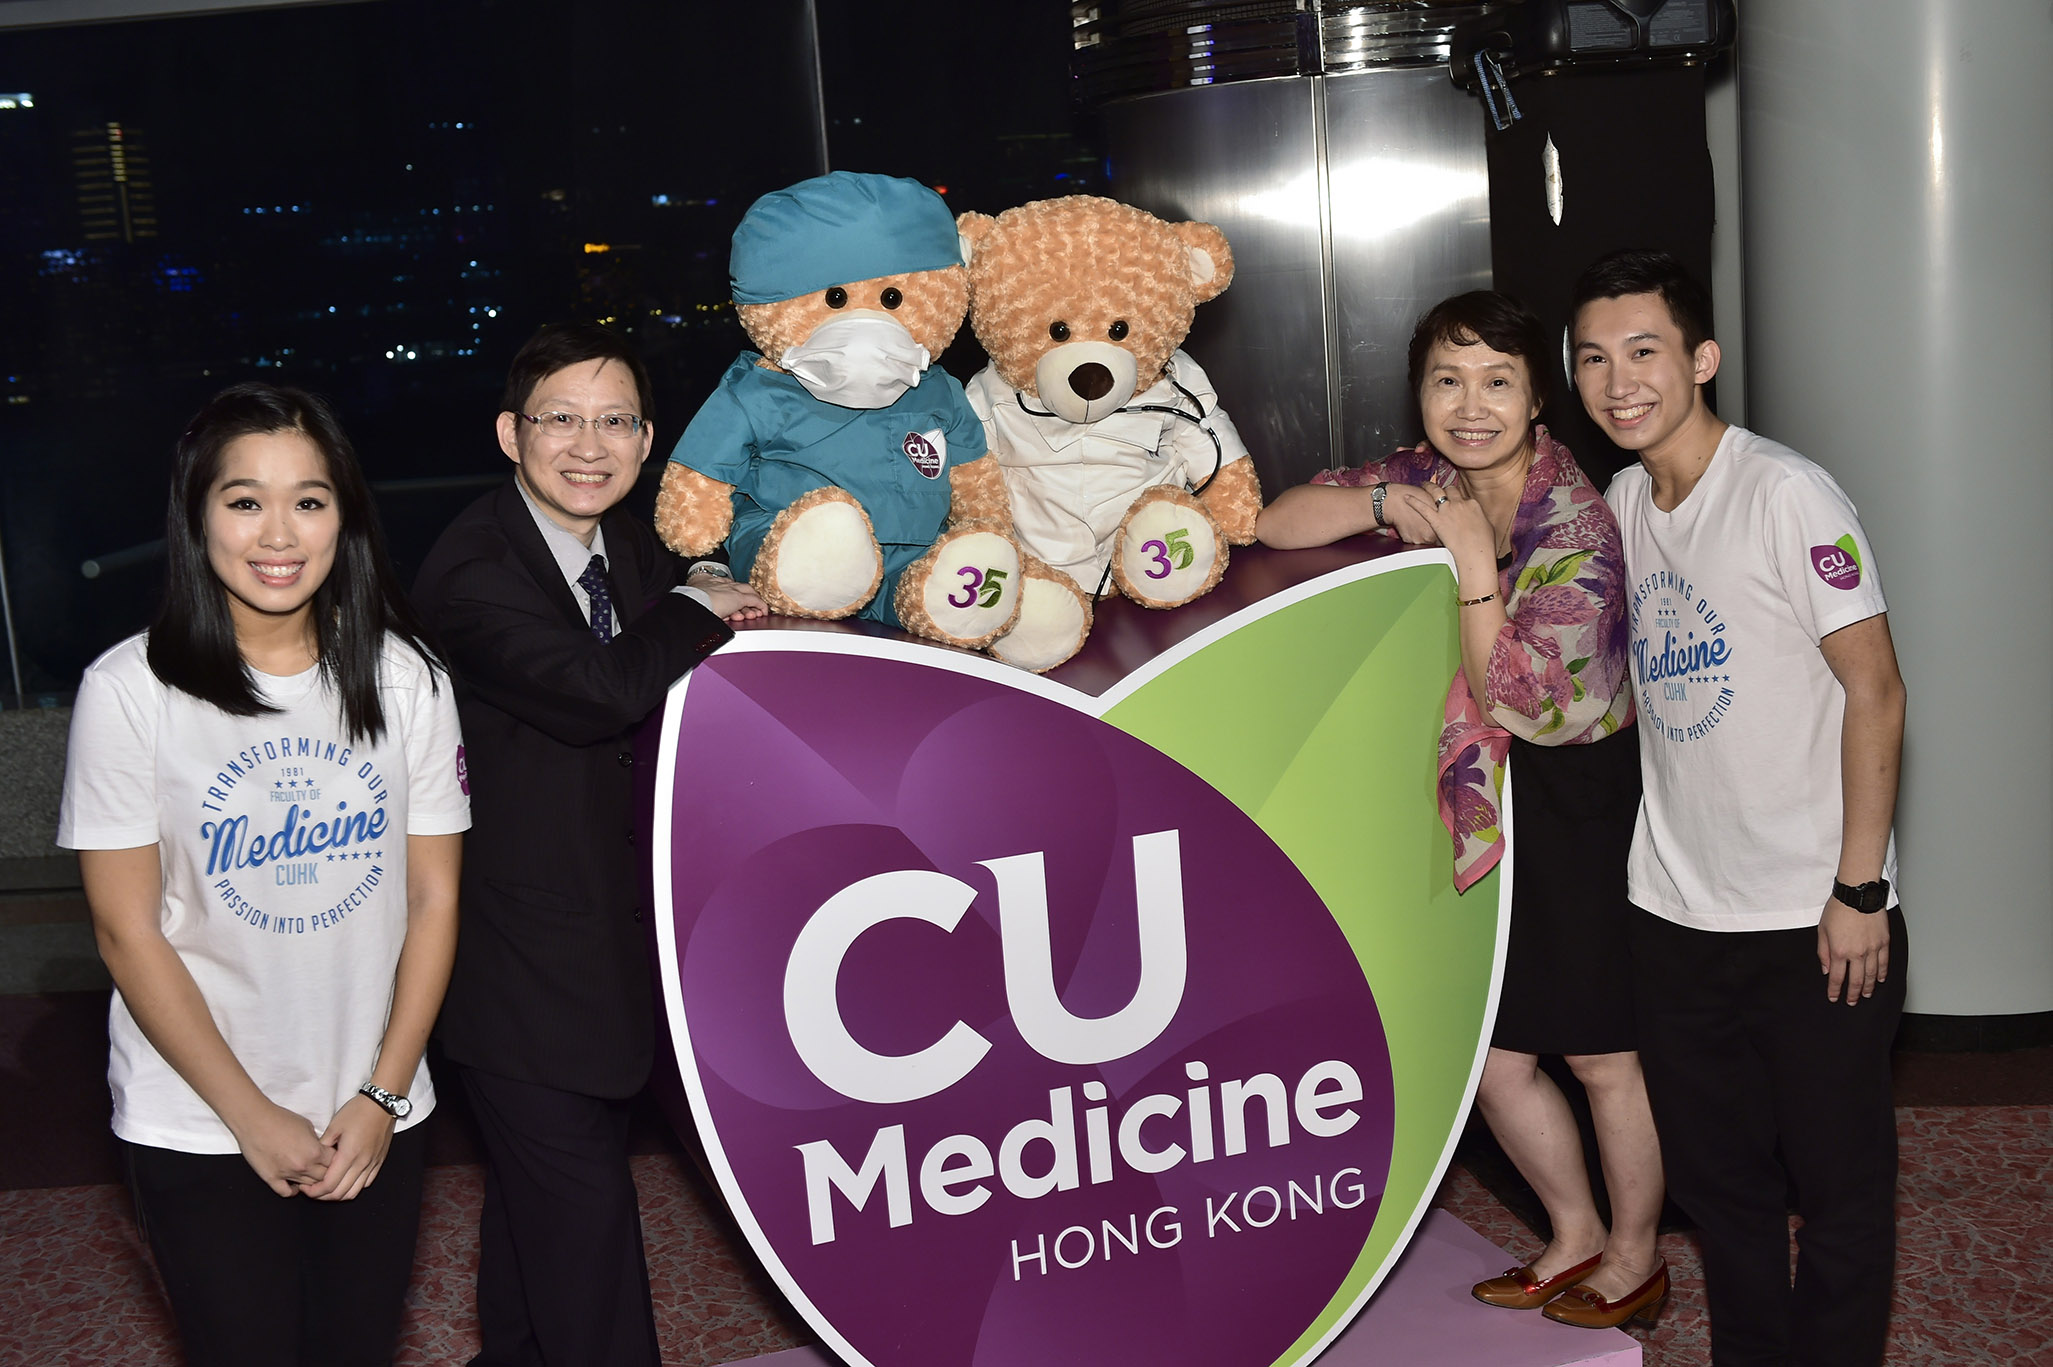 Guests take photo in front of the Faculty logo with medic and surgeon bears.